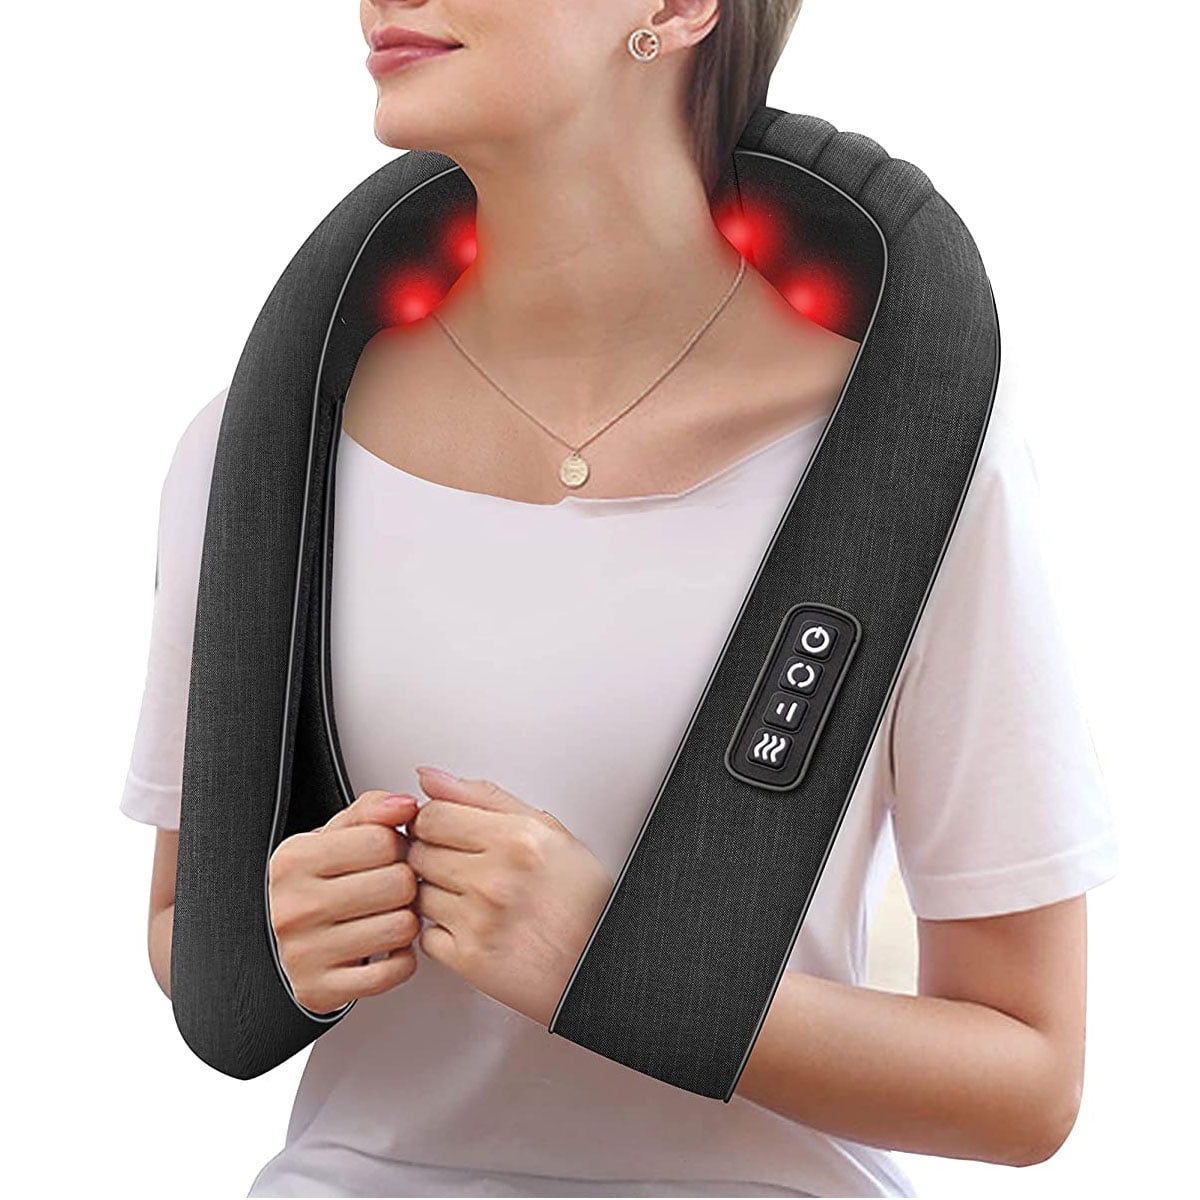  Shiatsu Neck and Shoulder Massager, Back Massager with Heat -  Gift for Men/Women/Mom/Dad - Deep Tissue 4D Kneading Massage Relieves  Shoulder, Neck and Back Muscle Pain, Best Gifts for Christmas(Black) 